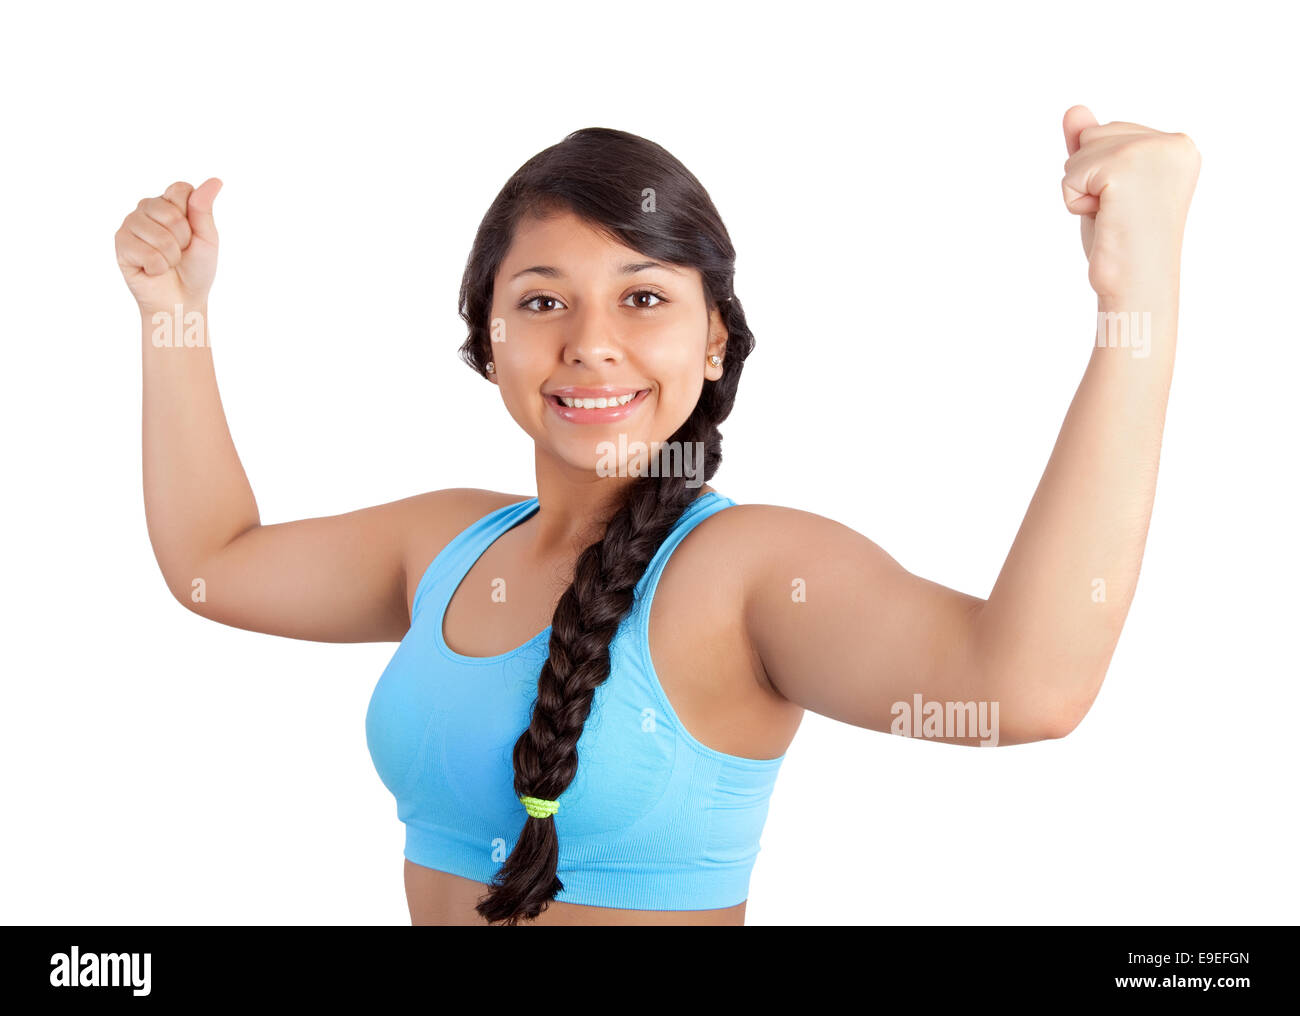 young sporty woman showing her biceps Stock Photo